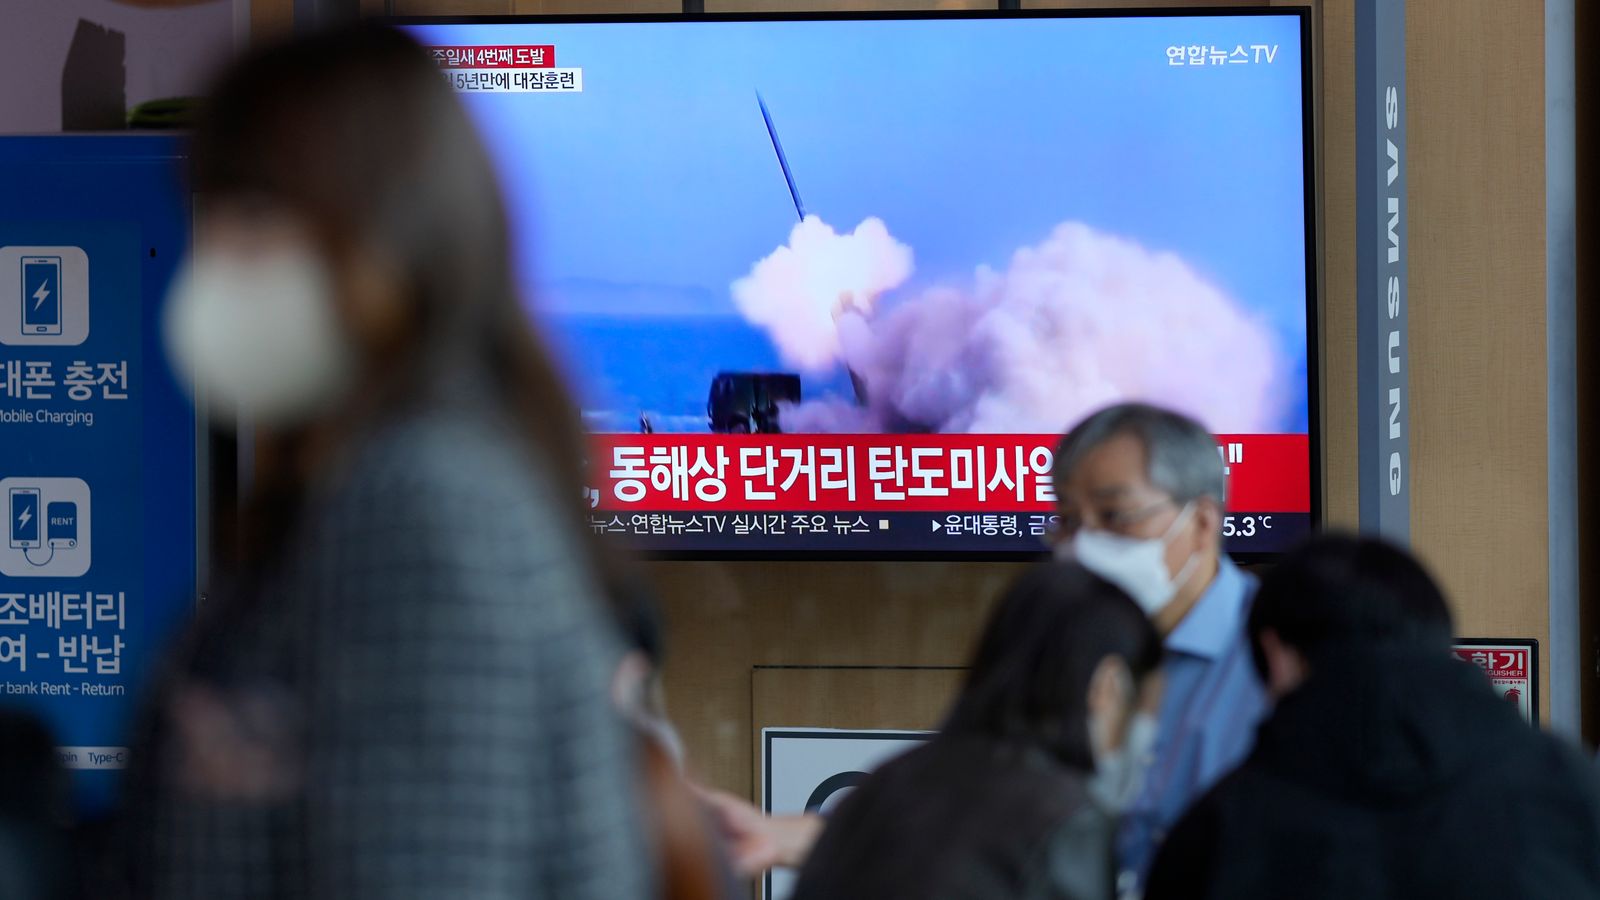 North Korea fires fourth missile in a week as South Korea stages military show